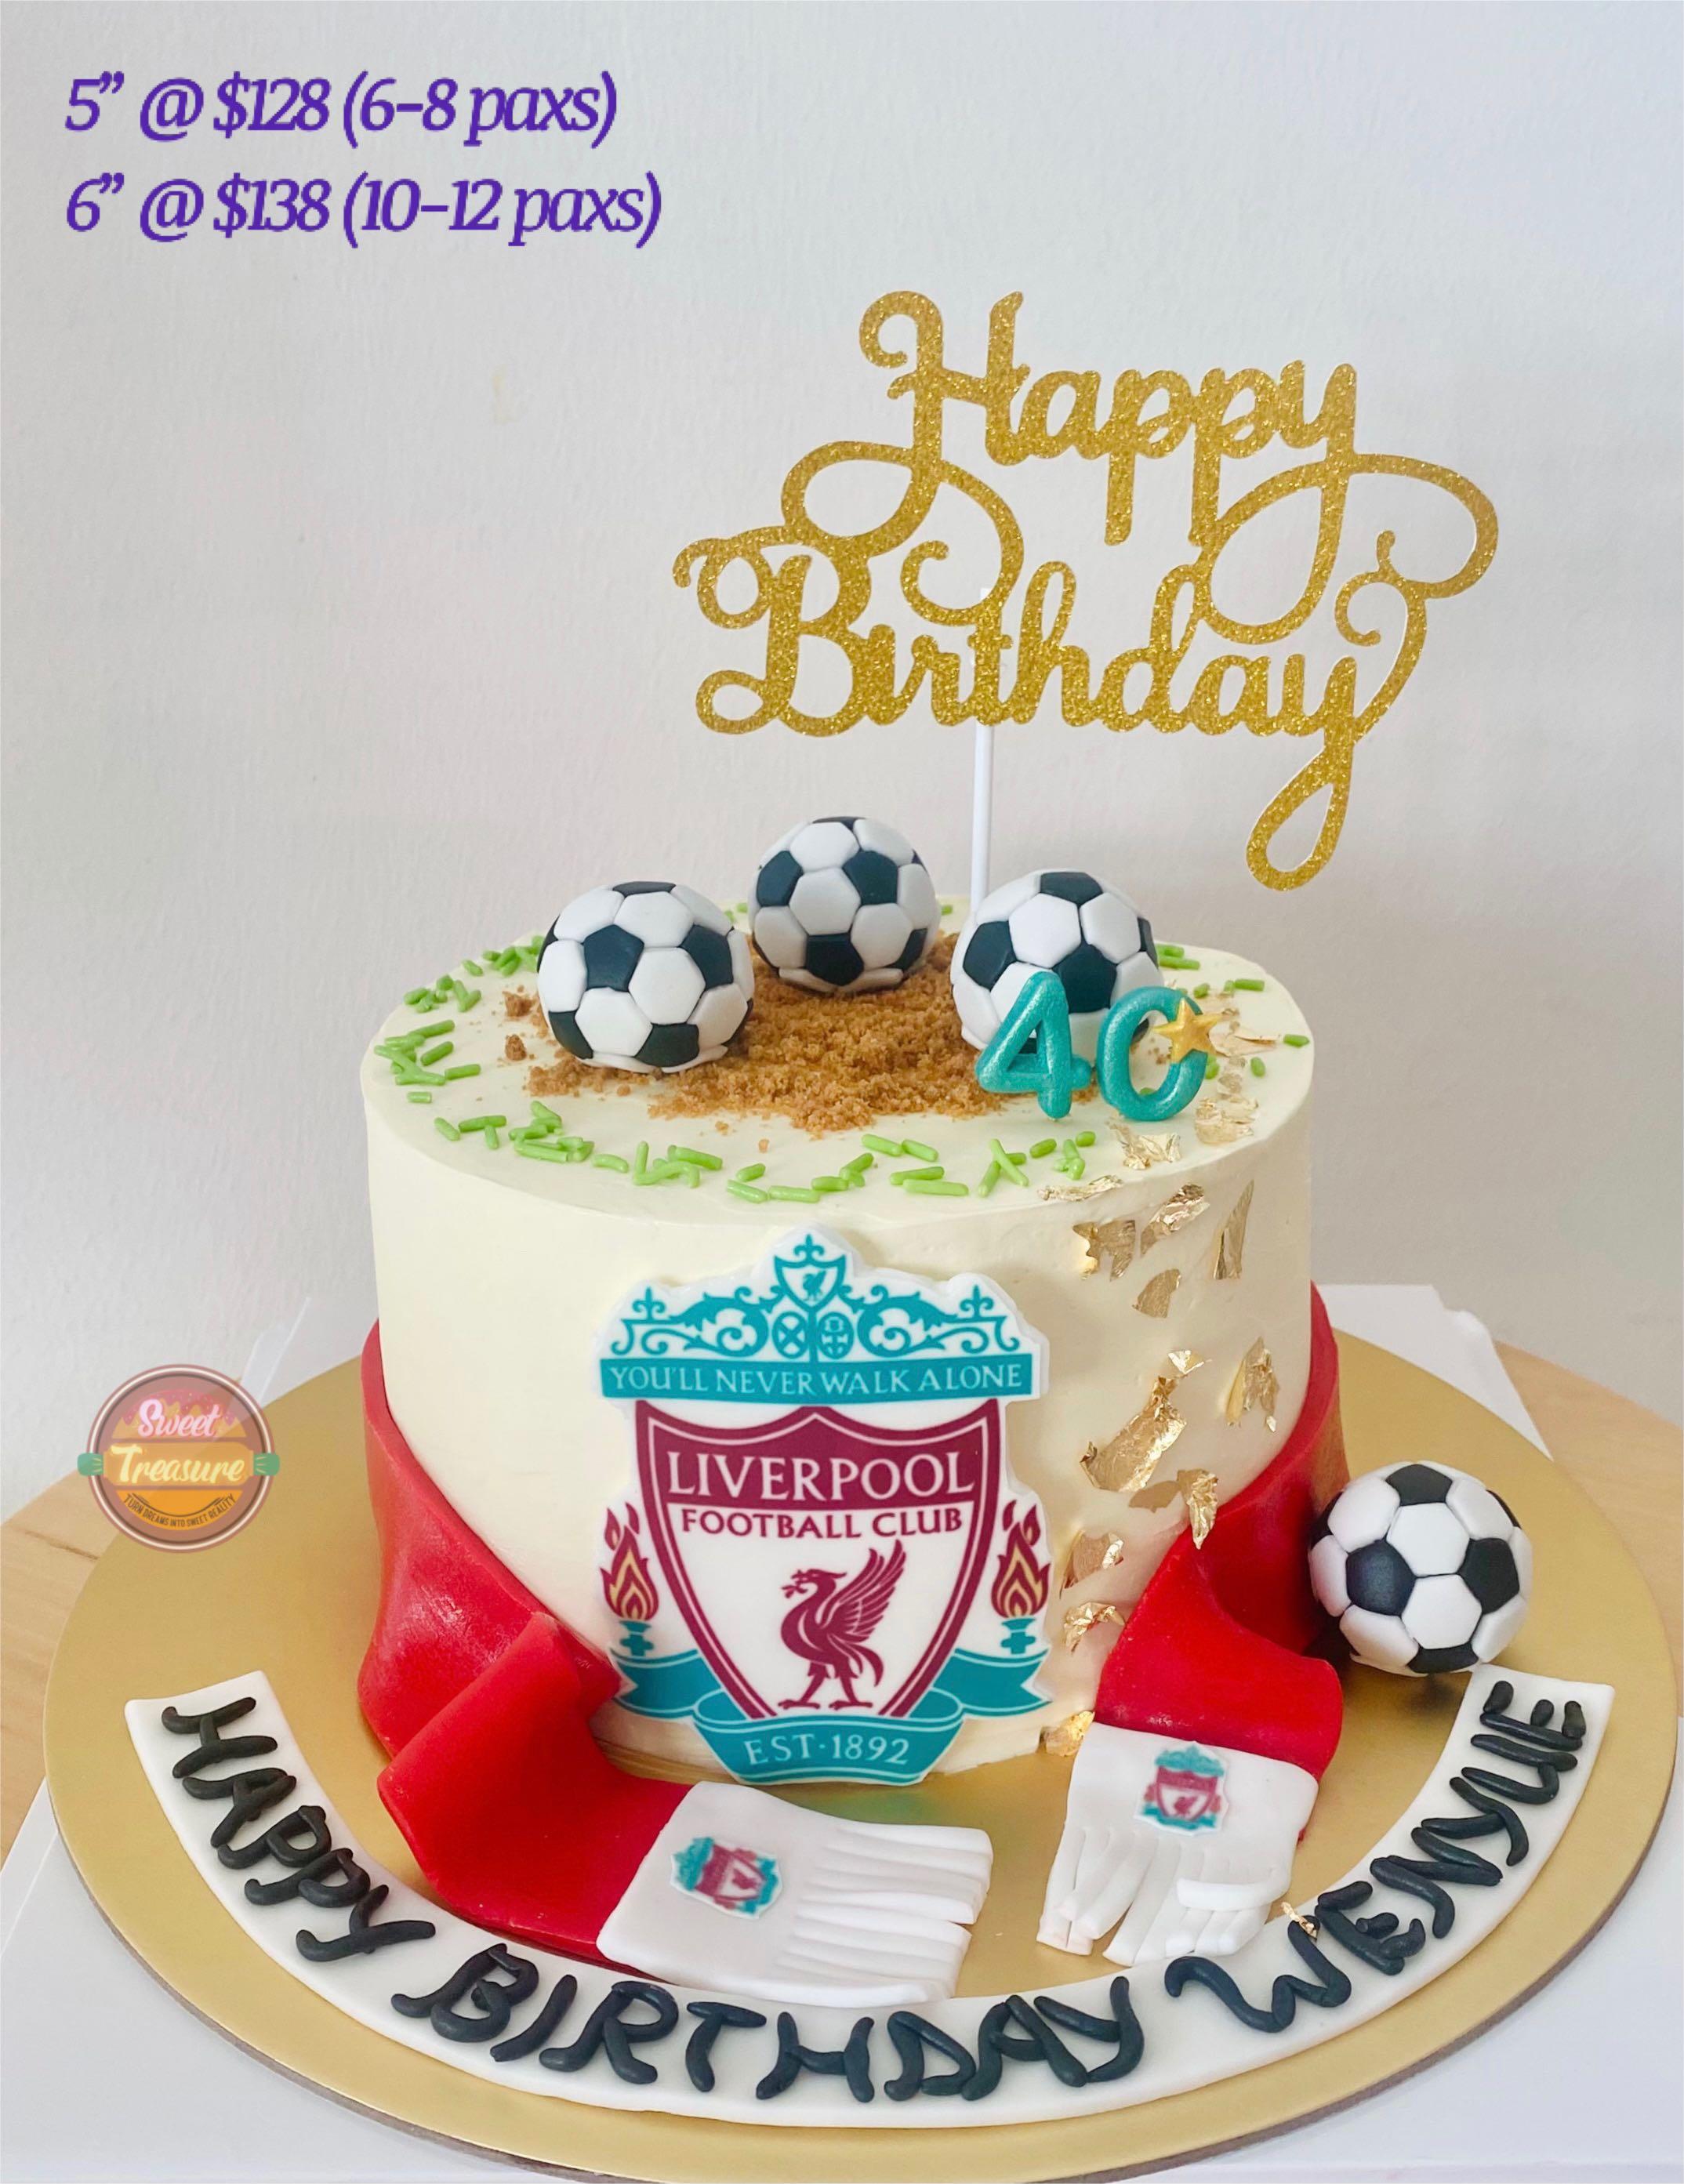 Soccer jersey / arsenal /Manchester United /Hotspur / Liverpool / adidas  theme fondant cake / cupcakes, Food & Drinks, Homemade Bakes on Carousell